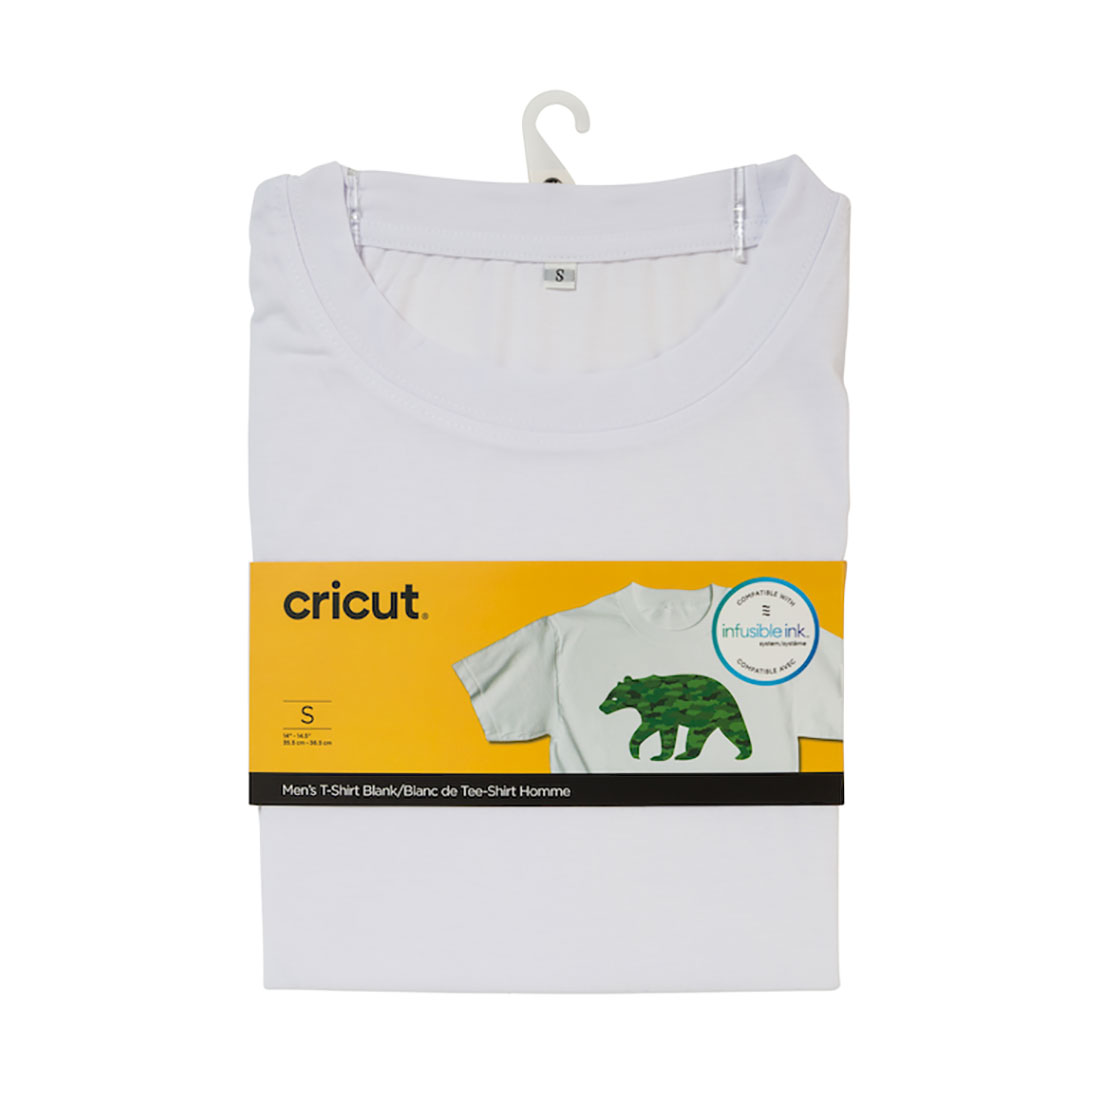  Cricut Men's T-Shirt Blank, Crew Neck, Small Infusible Ink,  White